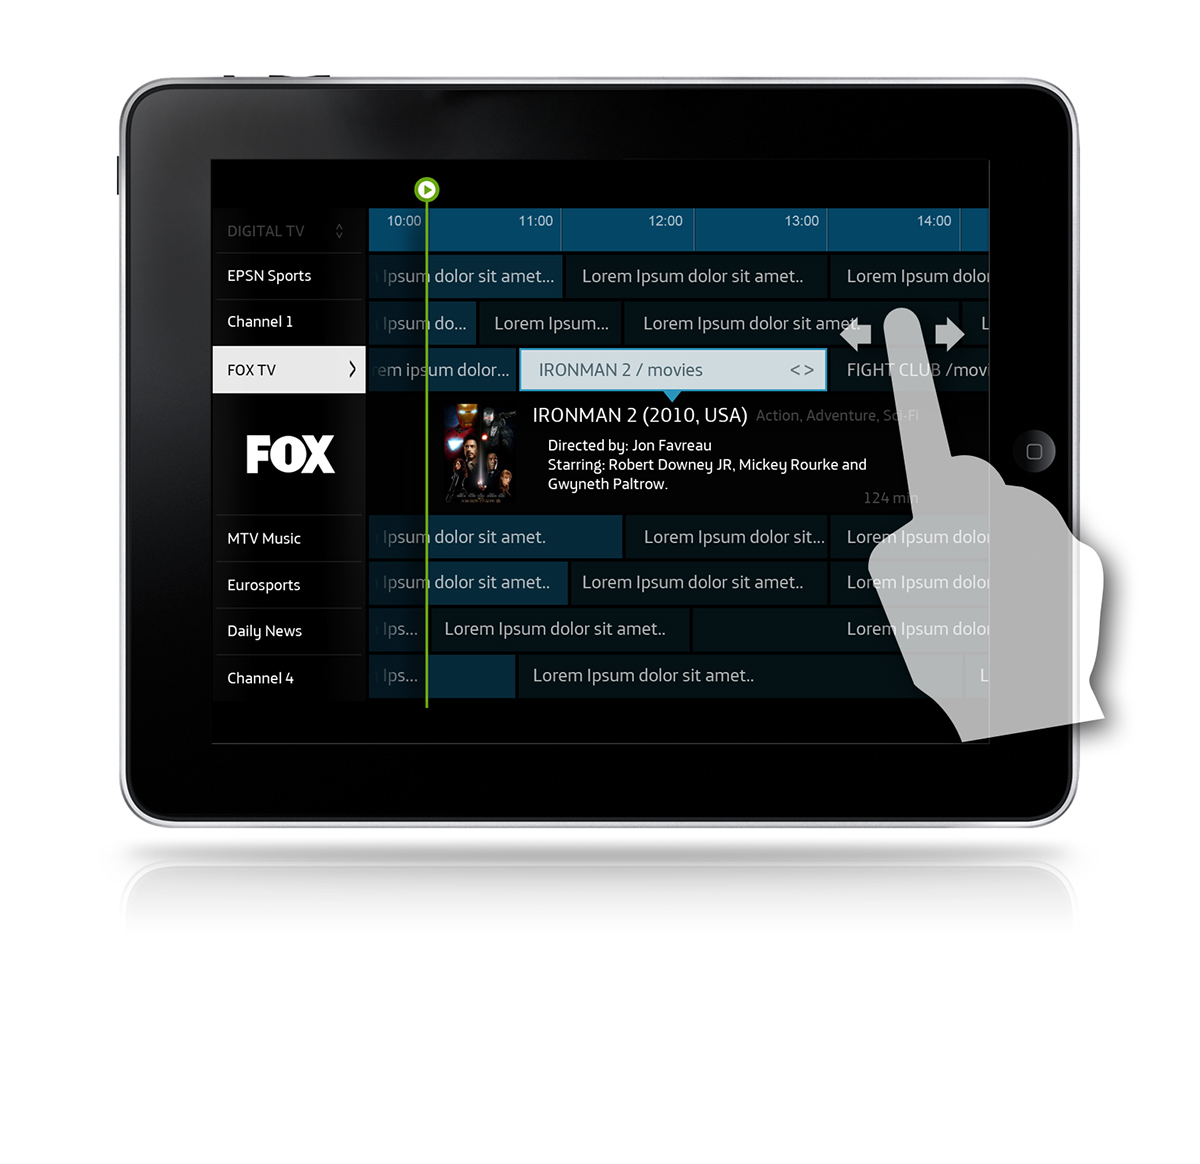 tv connectec tv iPad tablet smart tv epg electro programme guide television